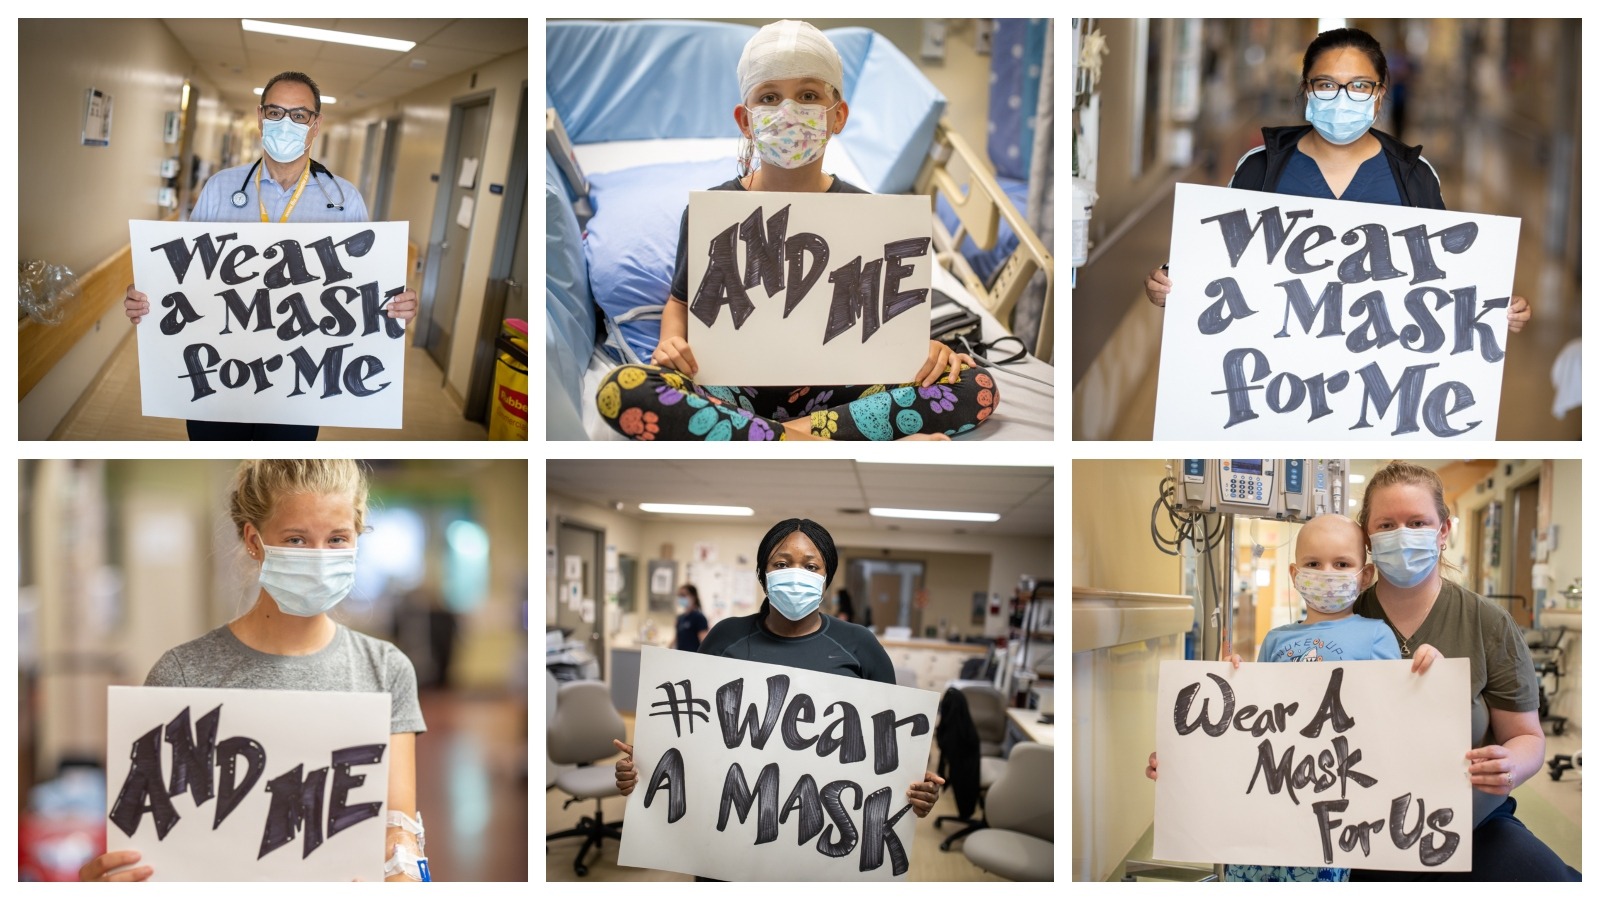 Wear a Mask for Me - photos of three healthcare providers and three patients holding signs